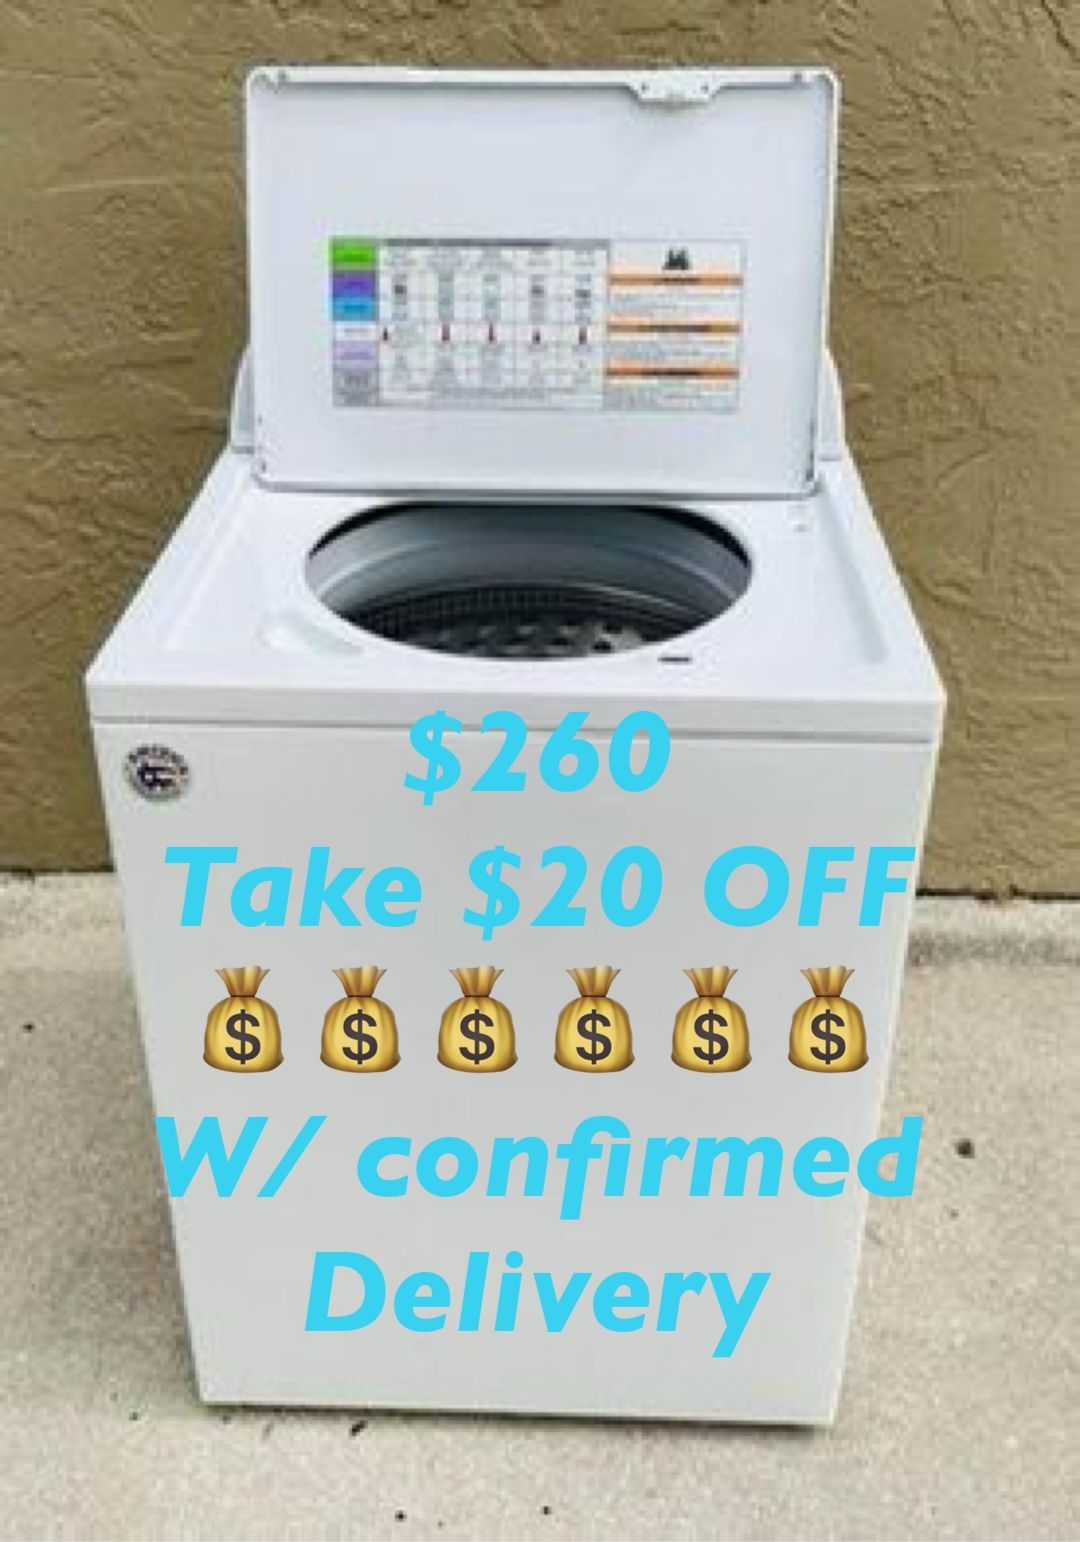 Washer Whirlpool Top Load Heavy Duty Super Capacity Like New FREE Delivery 